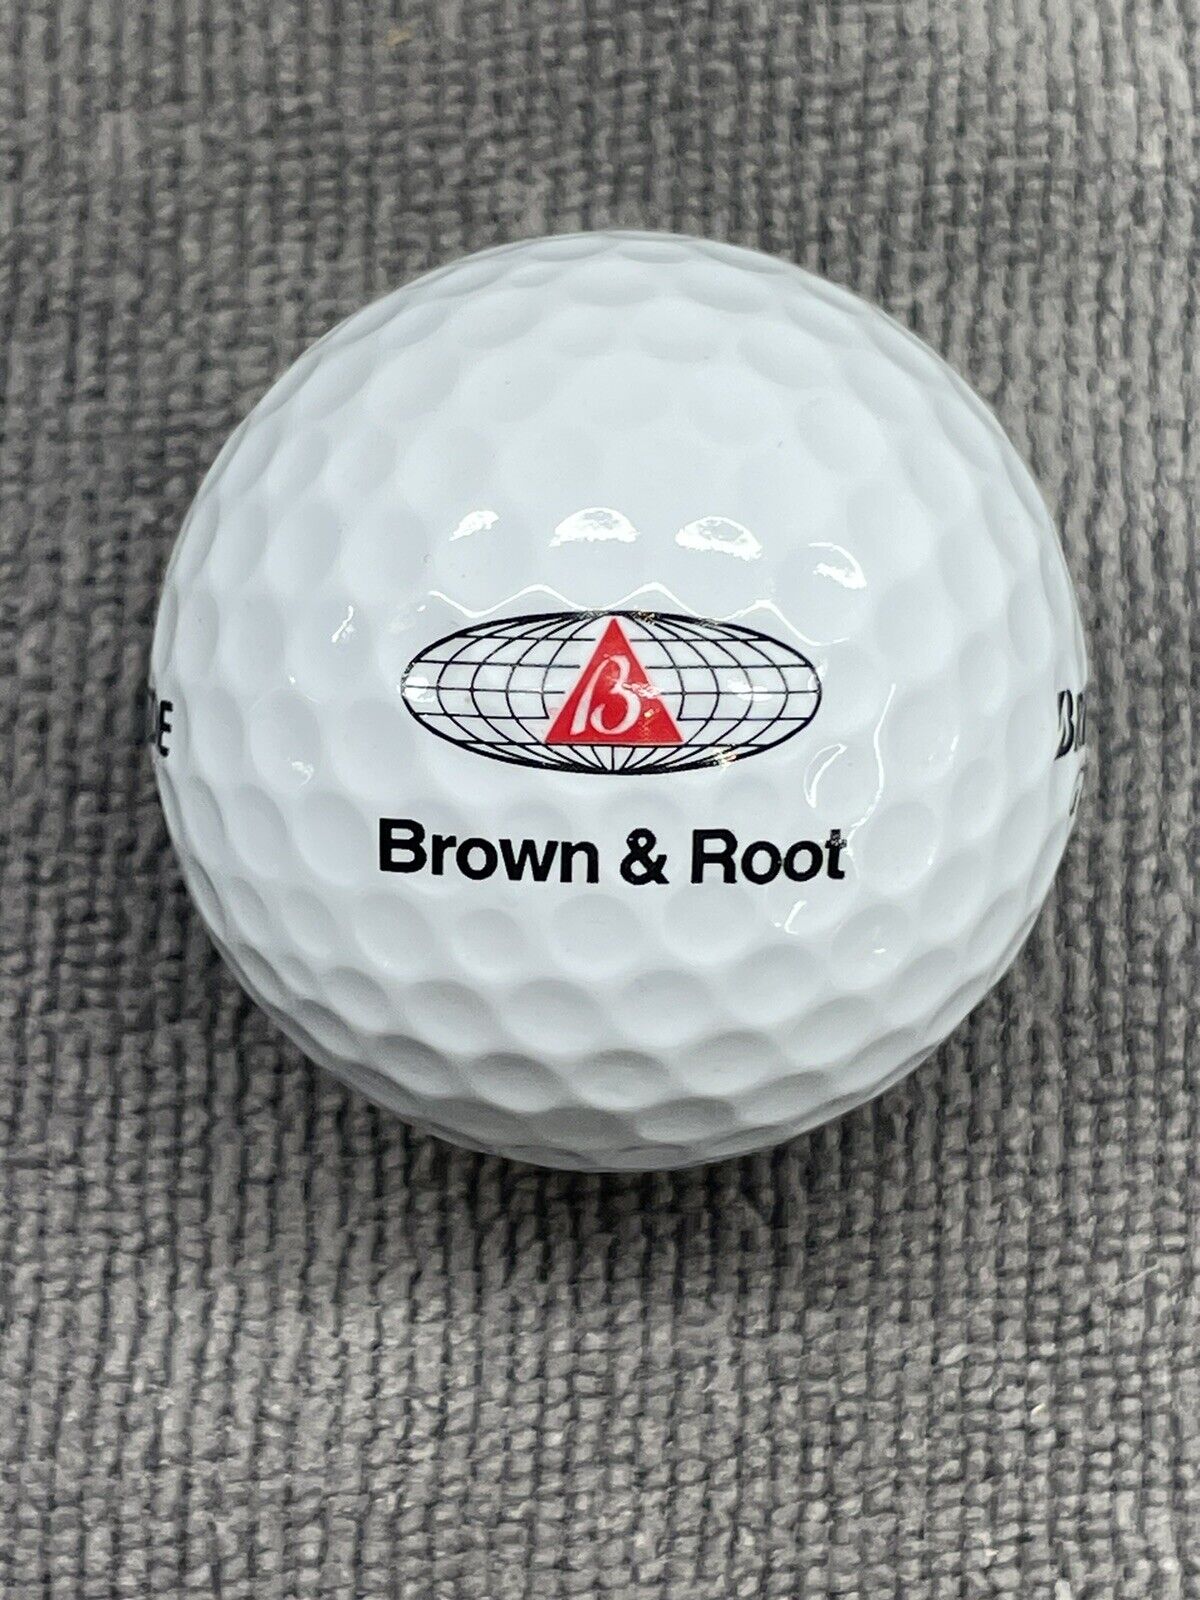 Brown & Root Industrial Services Logo Golf Ball (INV#9)